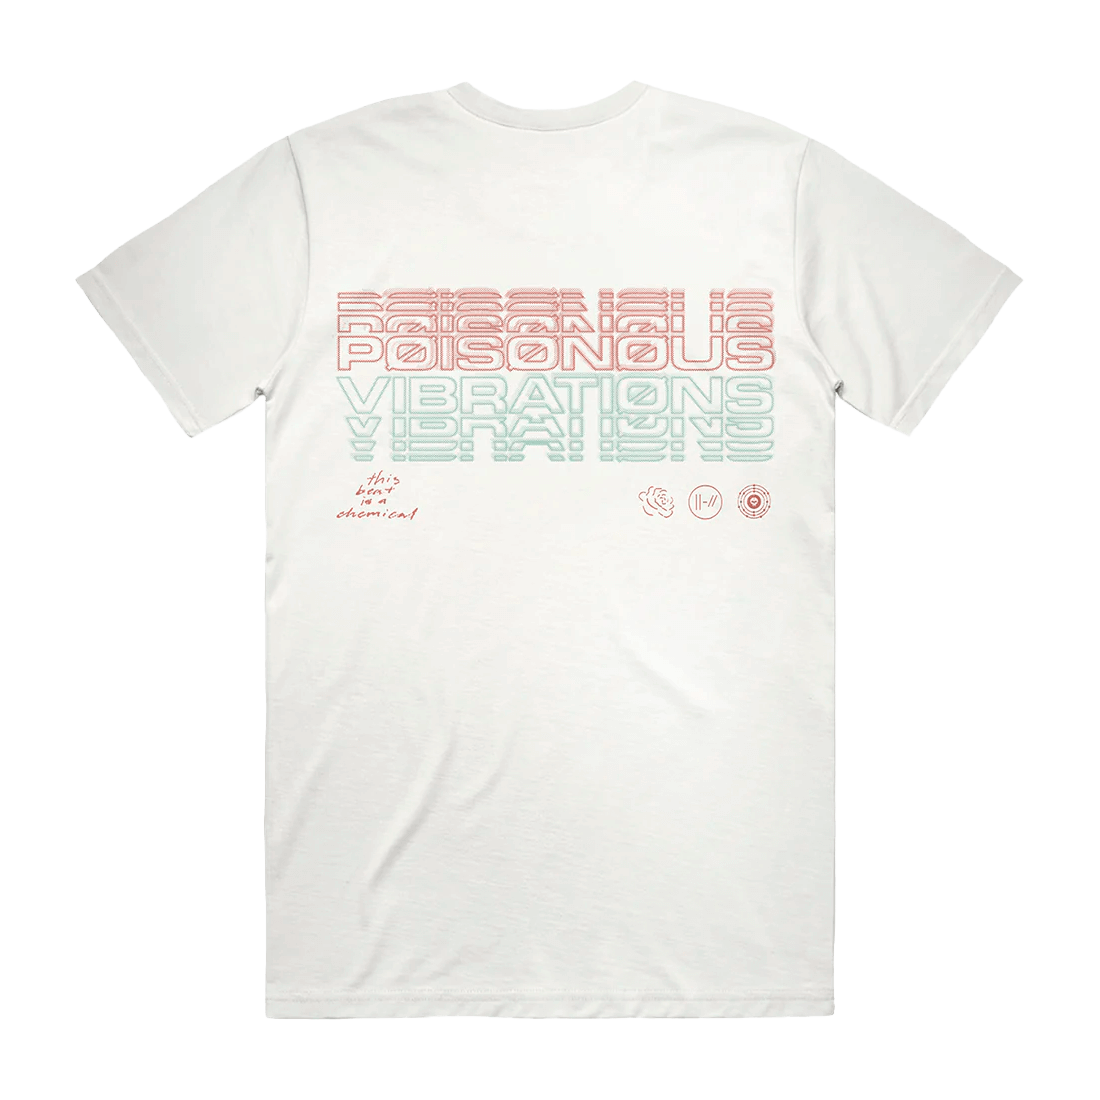 Poisonous Vibes Hollow T-Shirt White